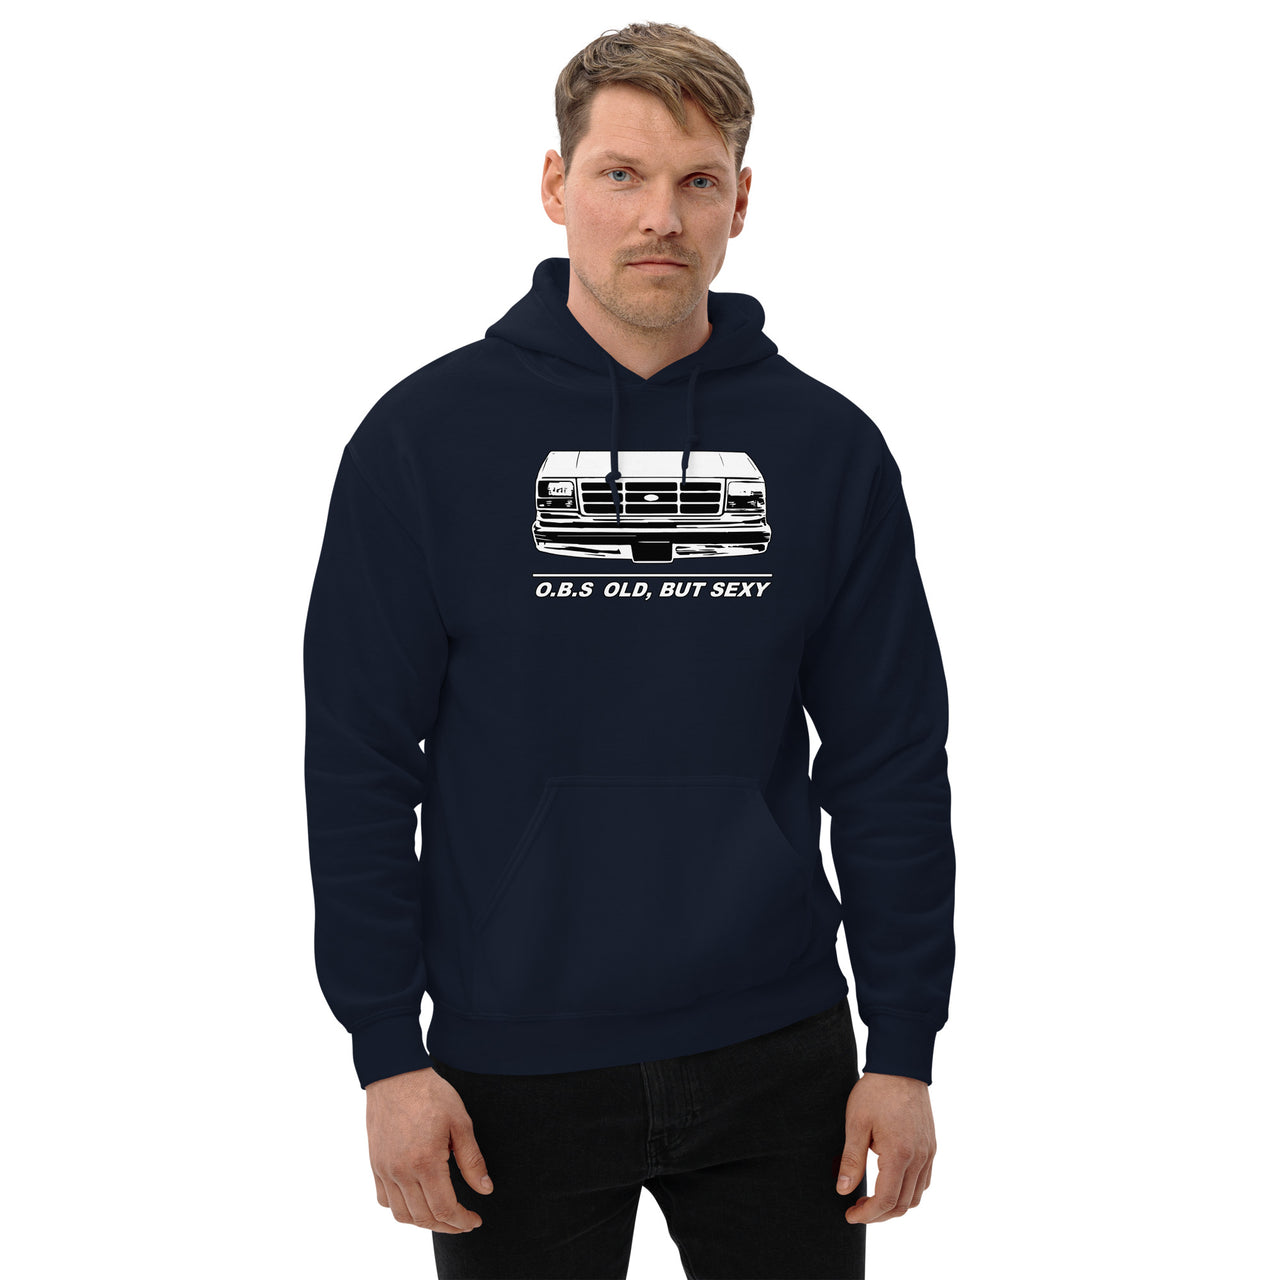 OBS Truck - Old, But Sexy Hoodie modeled in navy